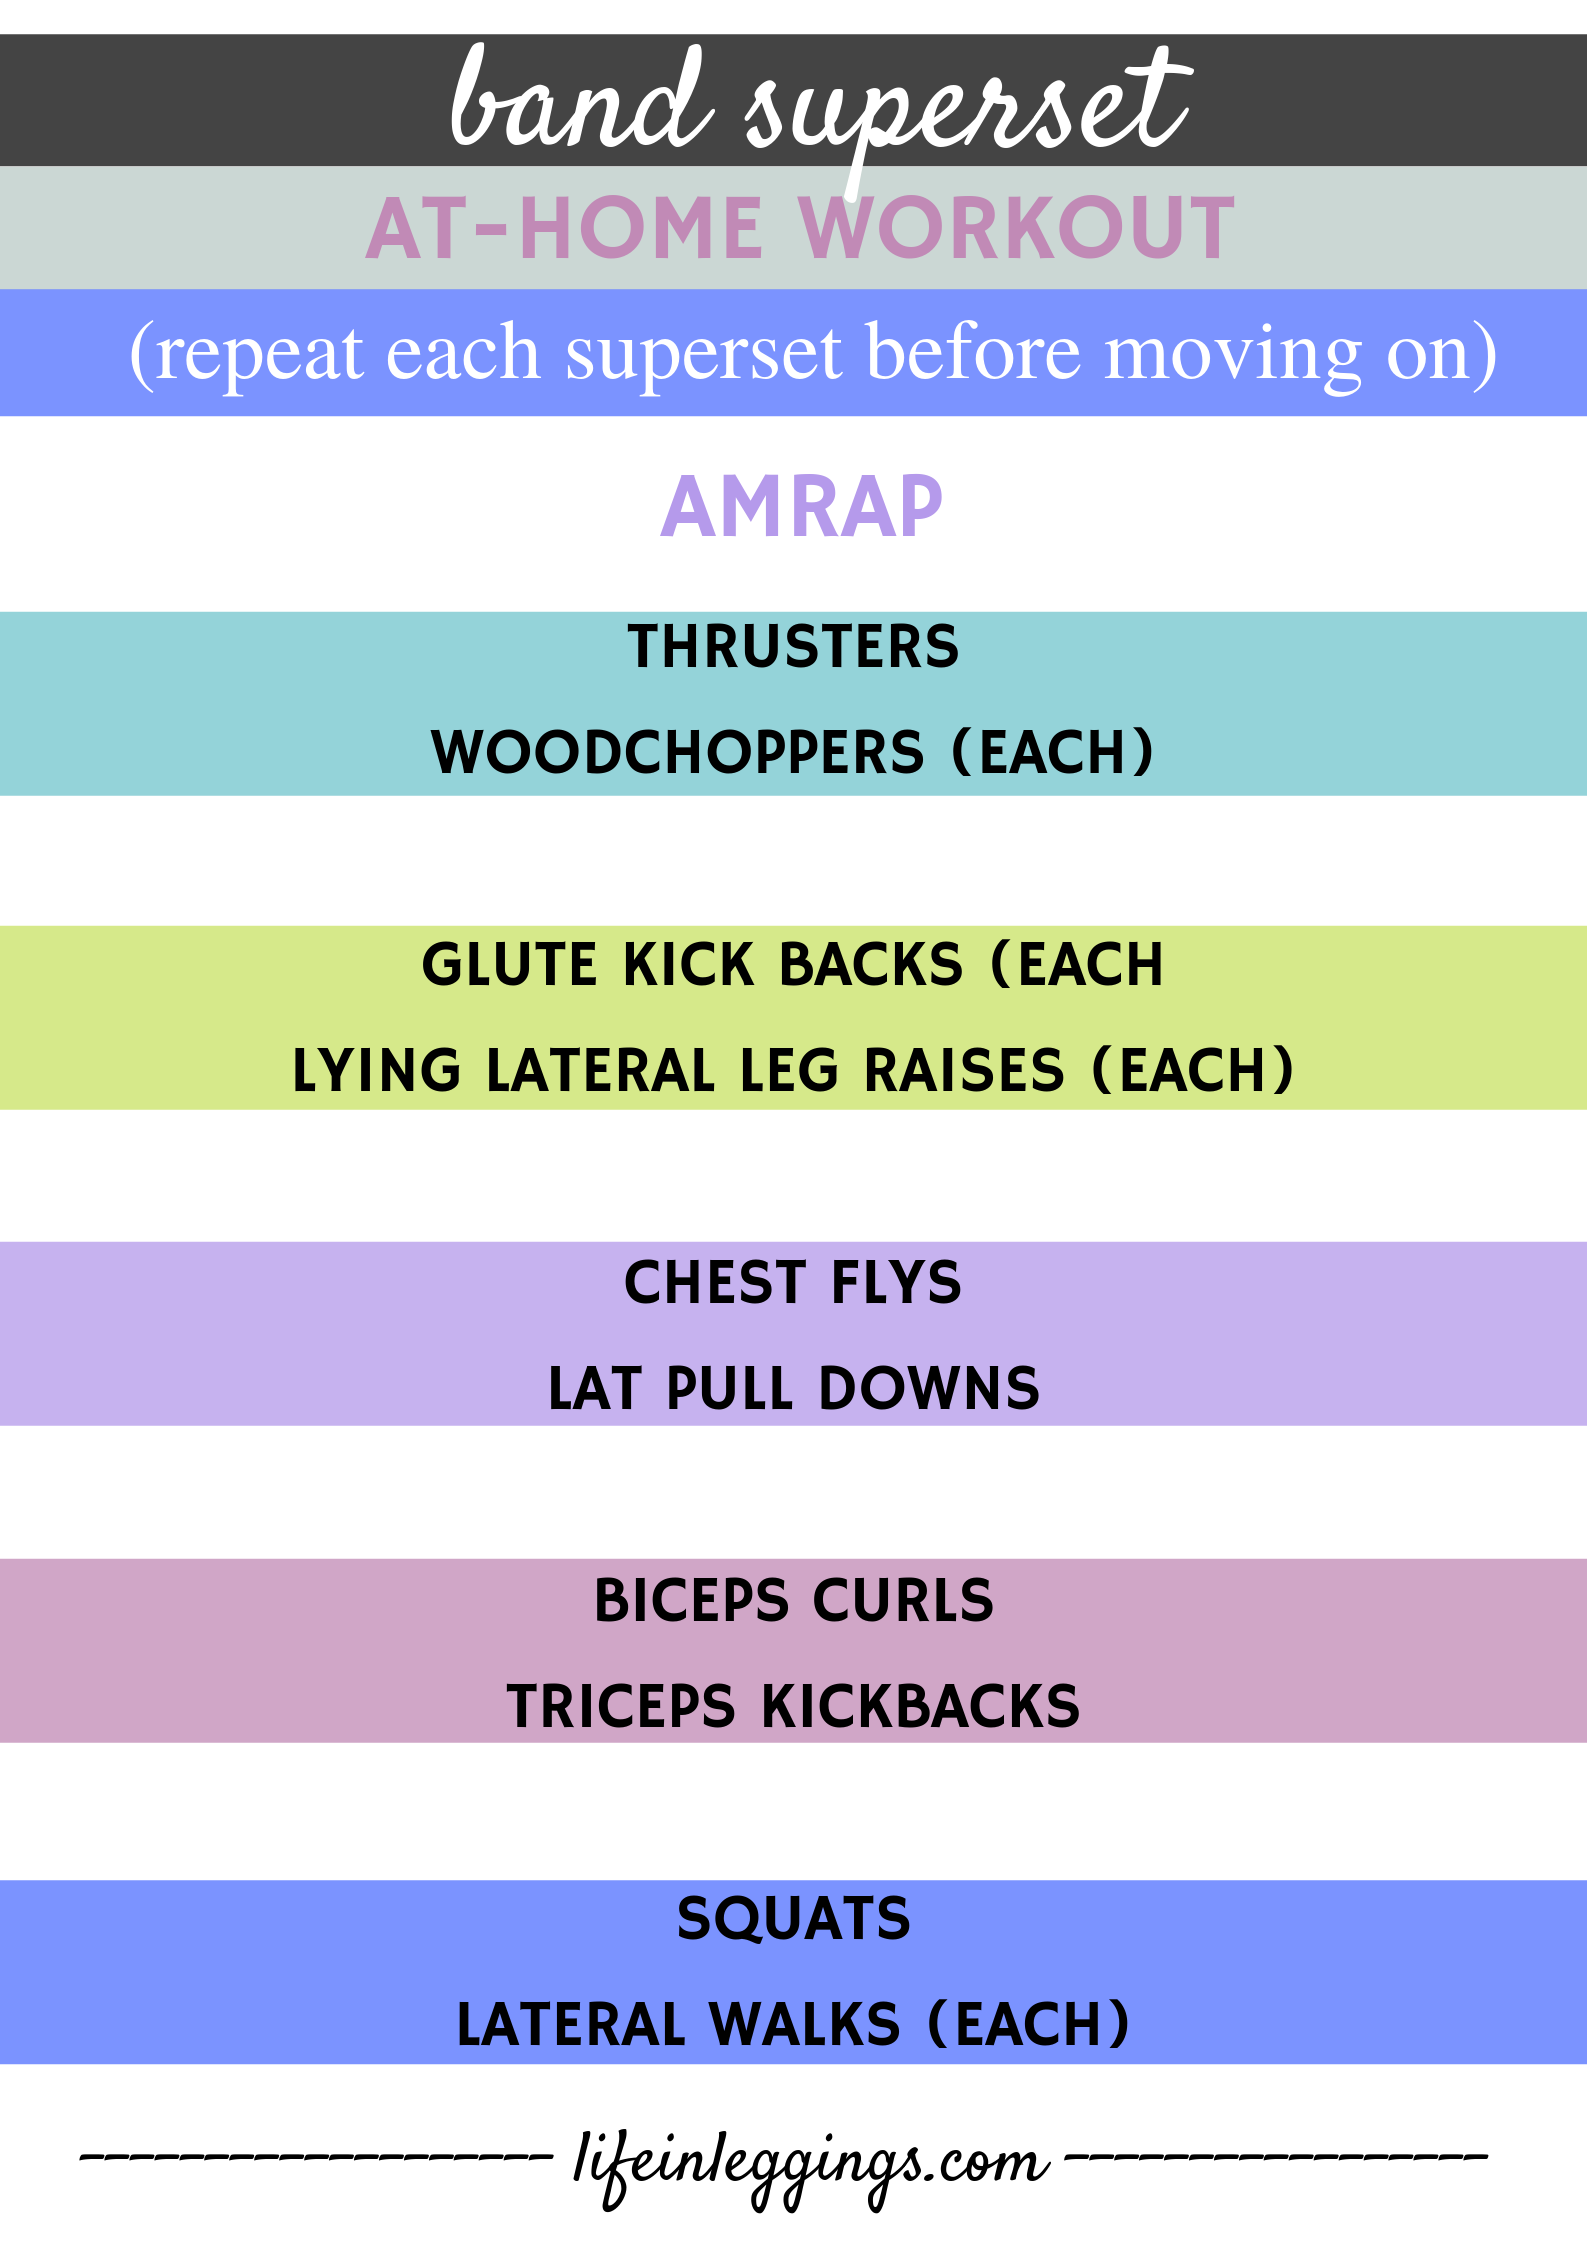 band-superset-at-home-workout-life-in-leggings